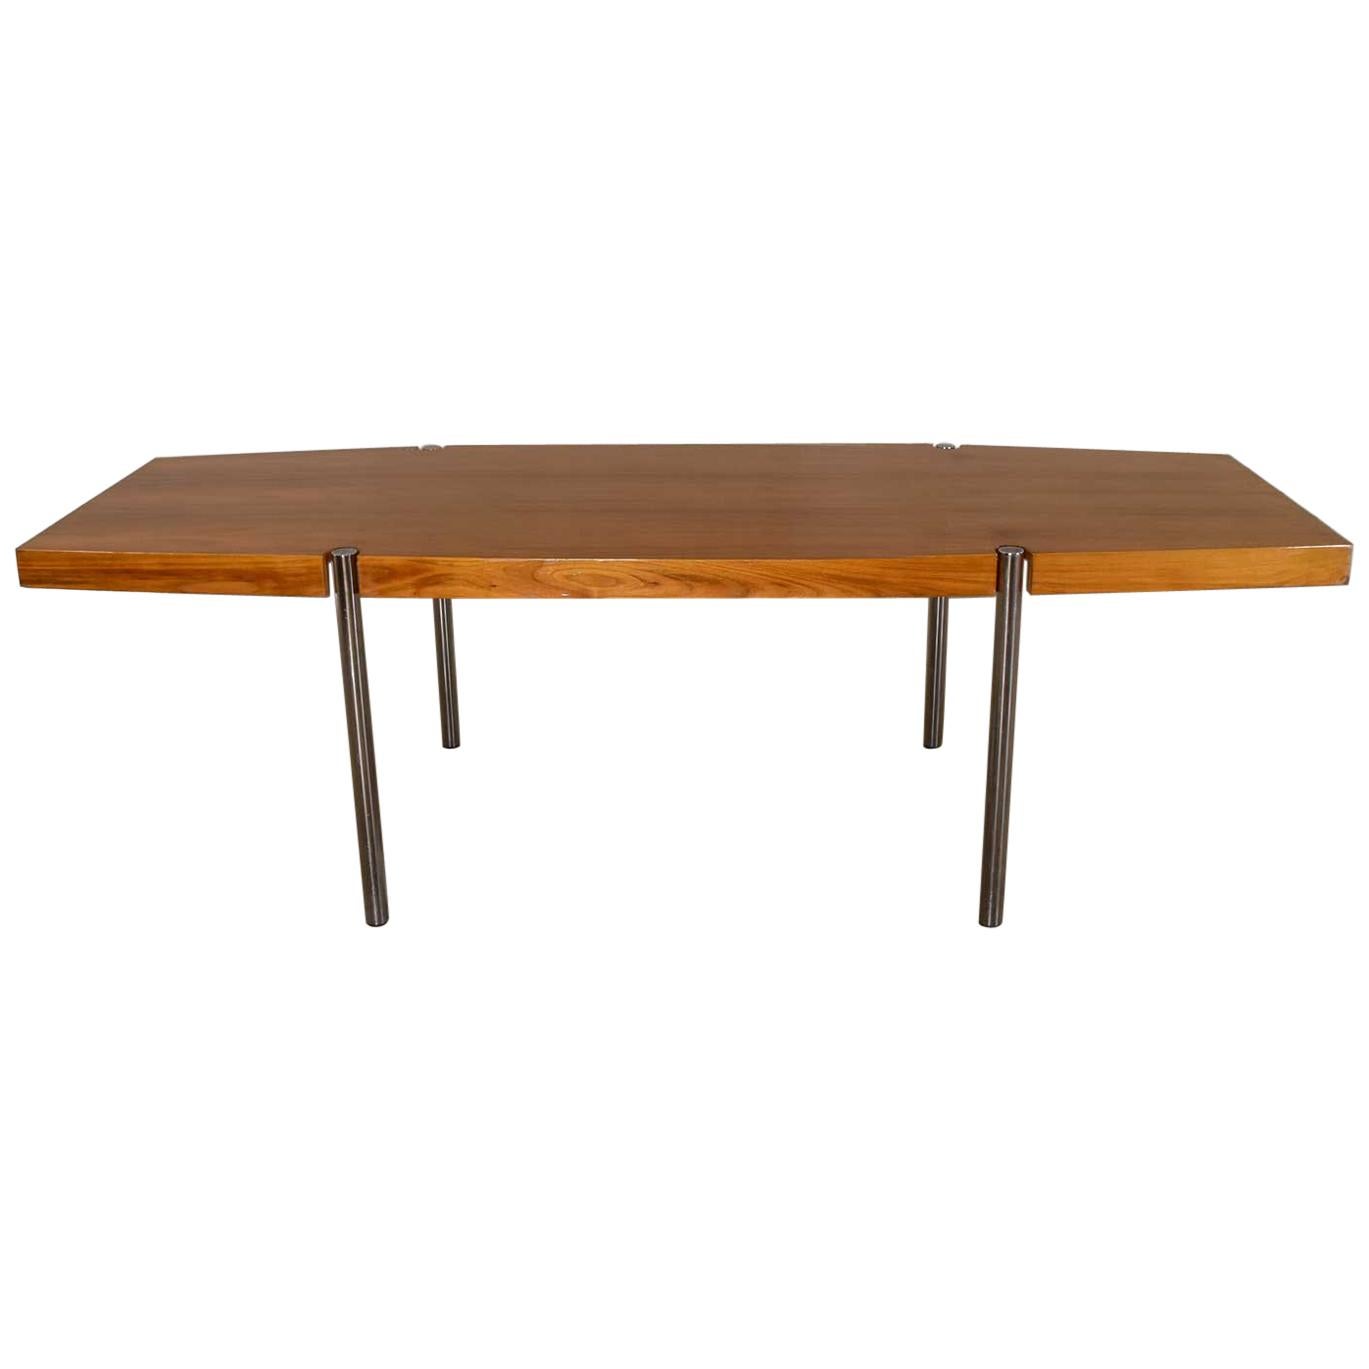 Modern Walnut & Chrome Boat Shape Dining Conference Table by Jens Risom for Howe For Sale